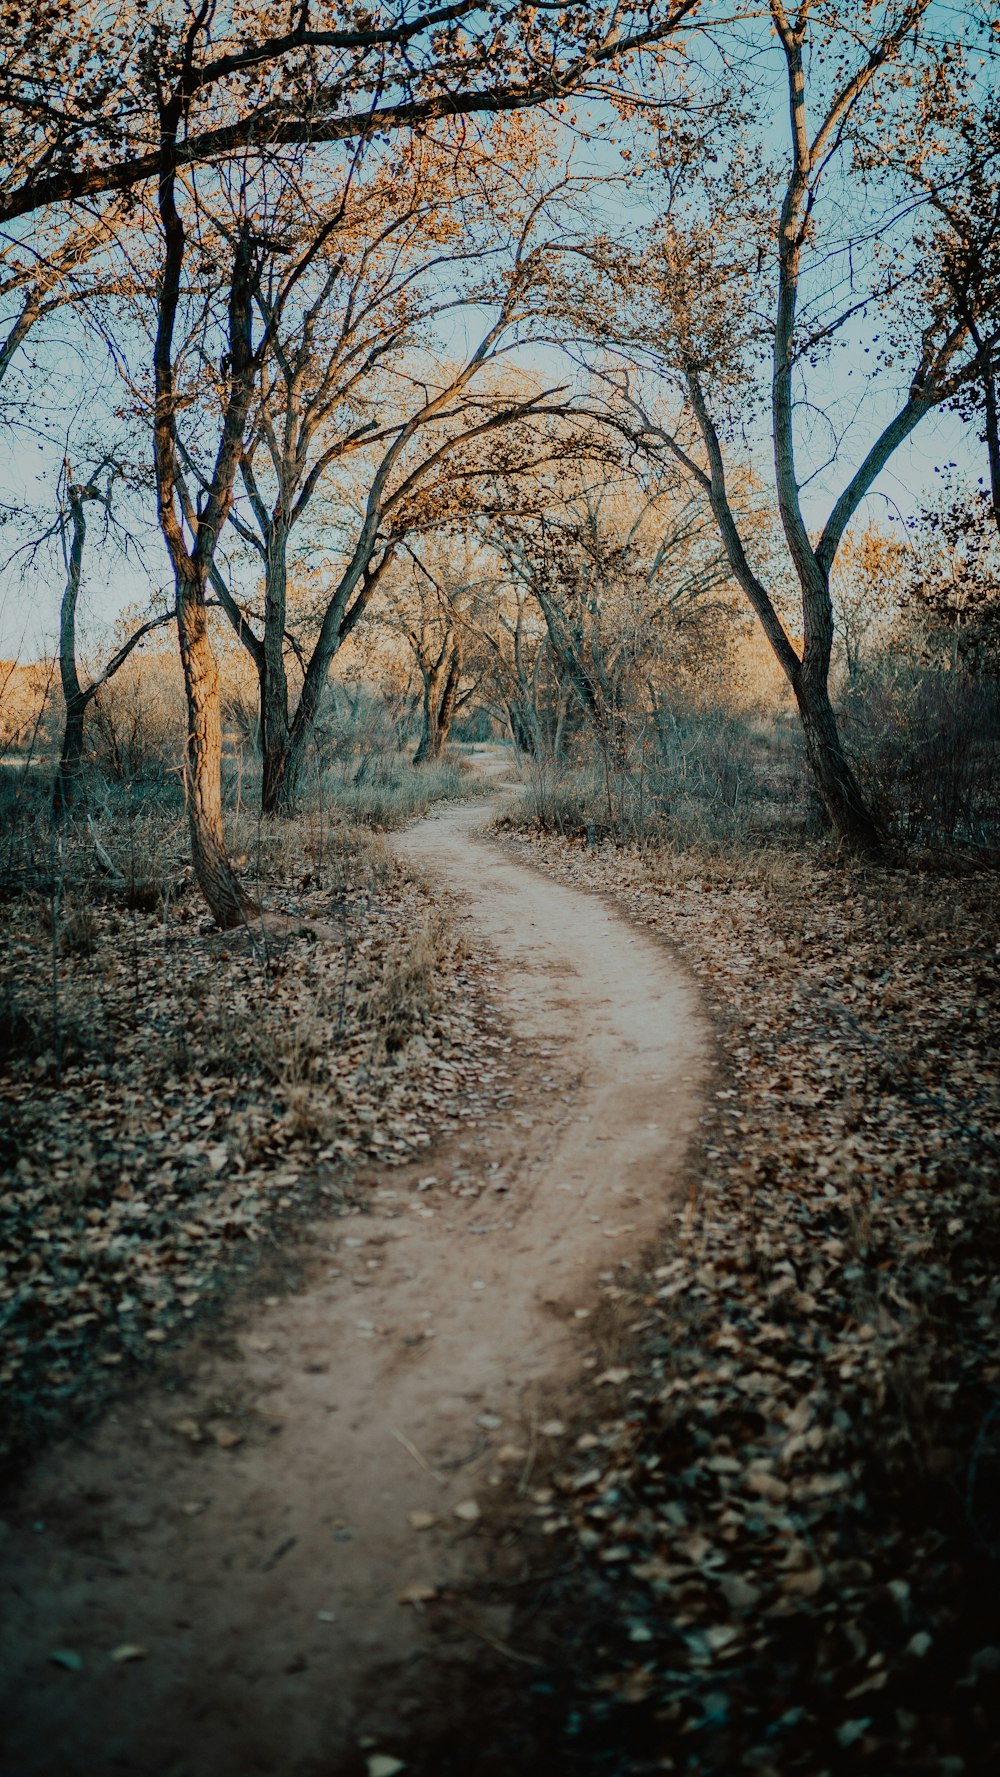 a dirt road surrounded by leaf covered trees